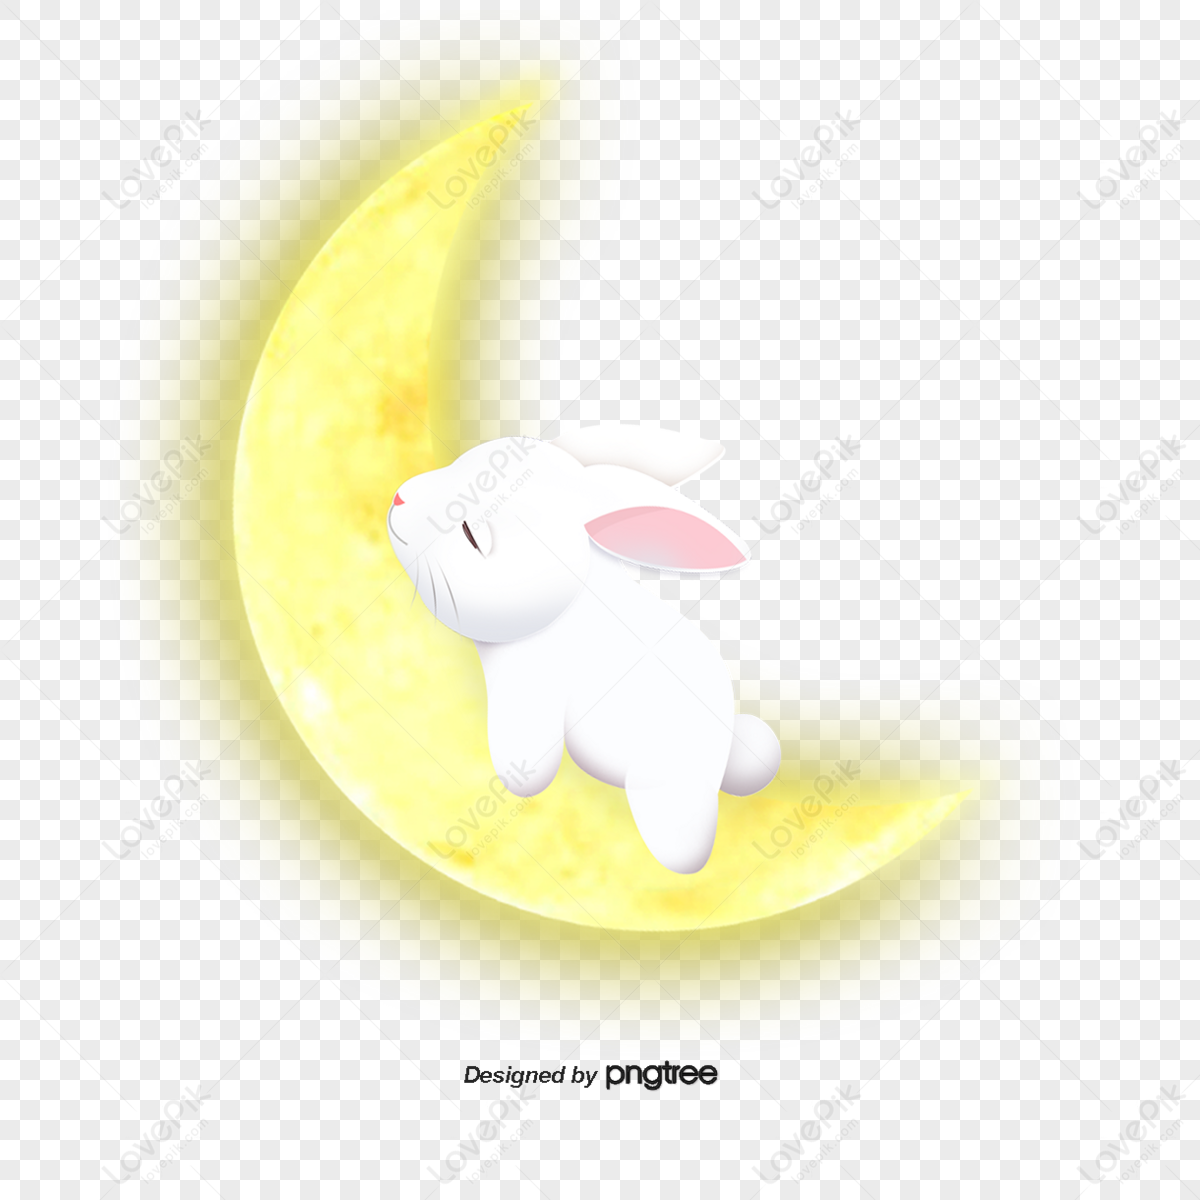 Check out this transparent TOTS - Baby Rabbit PNG image